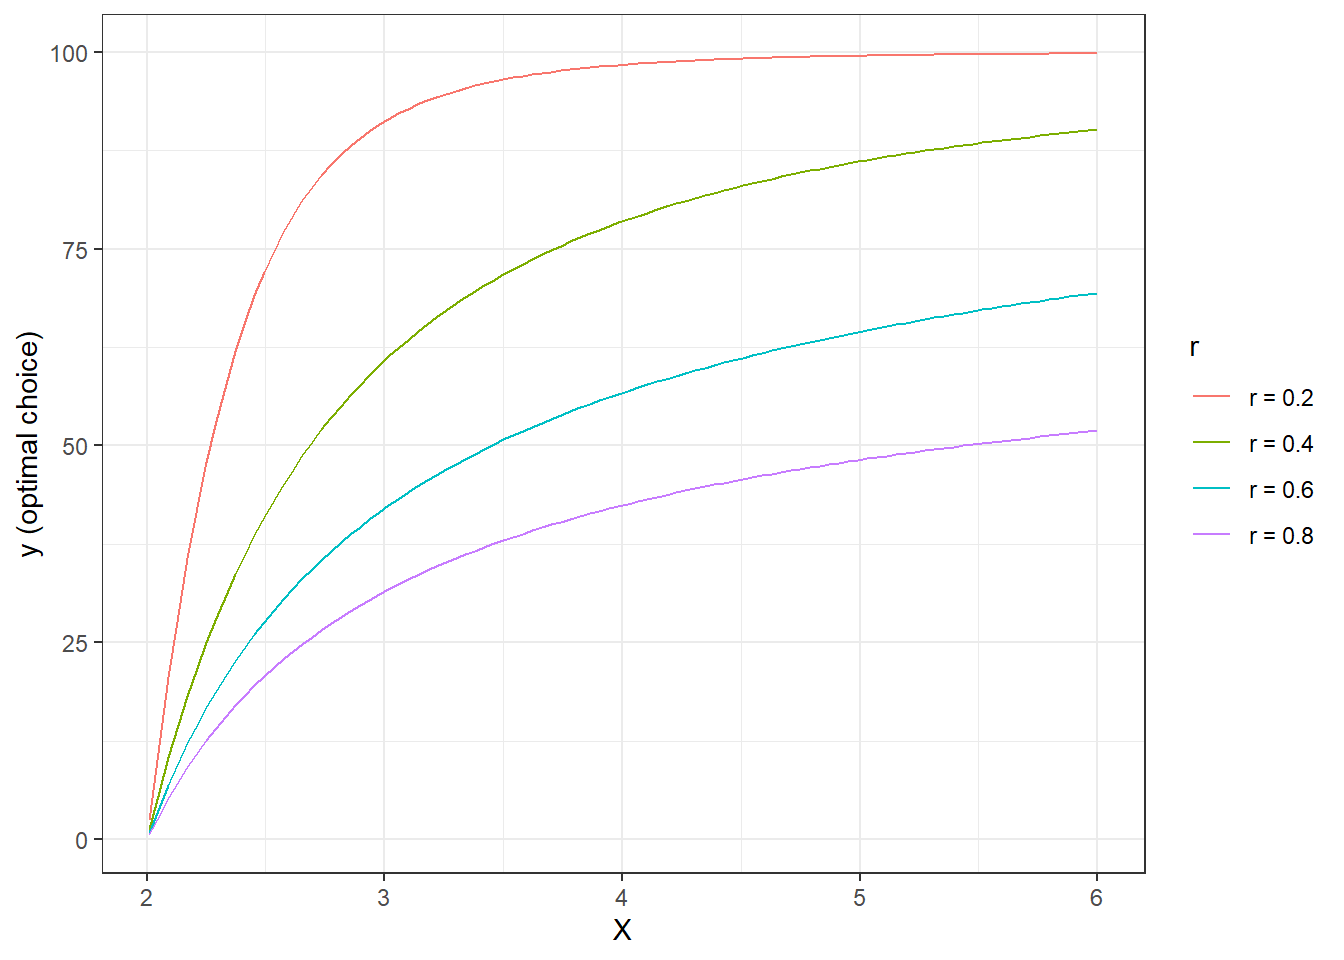 Predictions from a model of expected utility maximization. $r$ is the parameter in the CRRA utility function $u(x)=\frac{x^{1-r}}{1-r}$